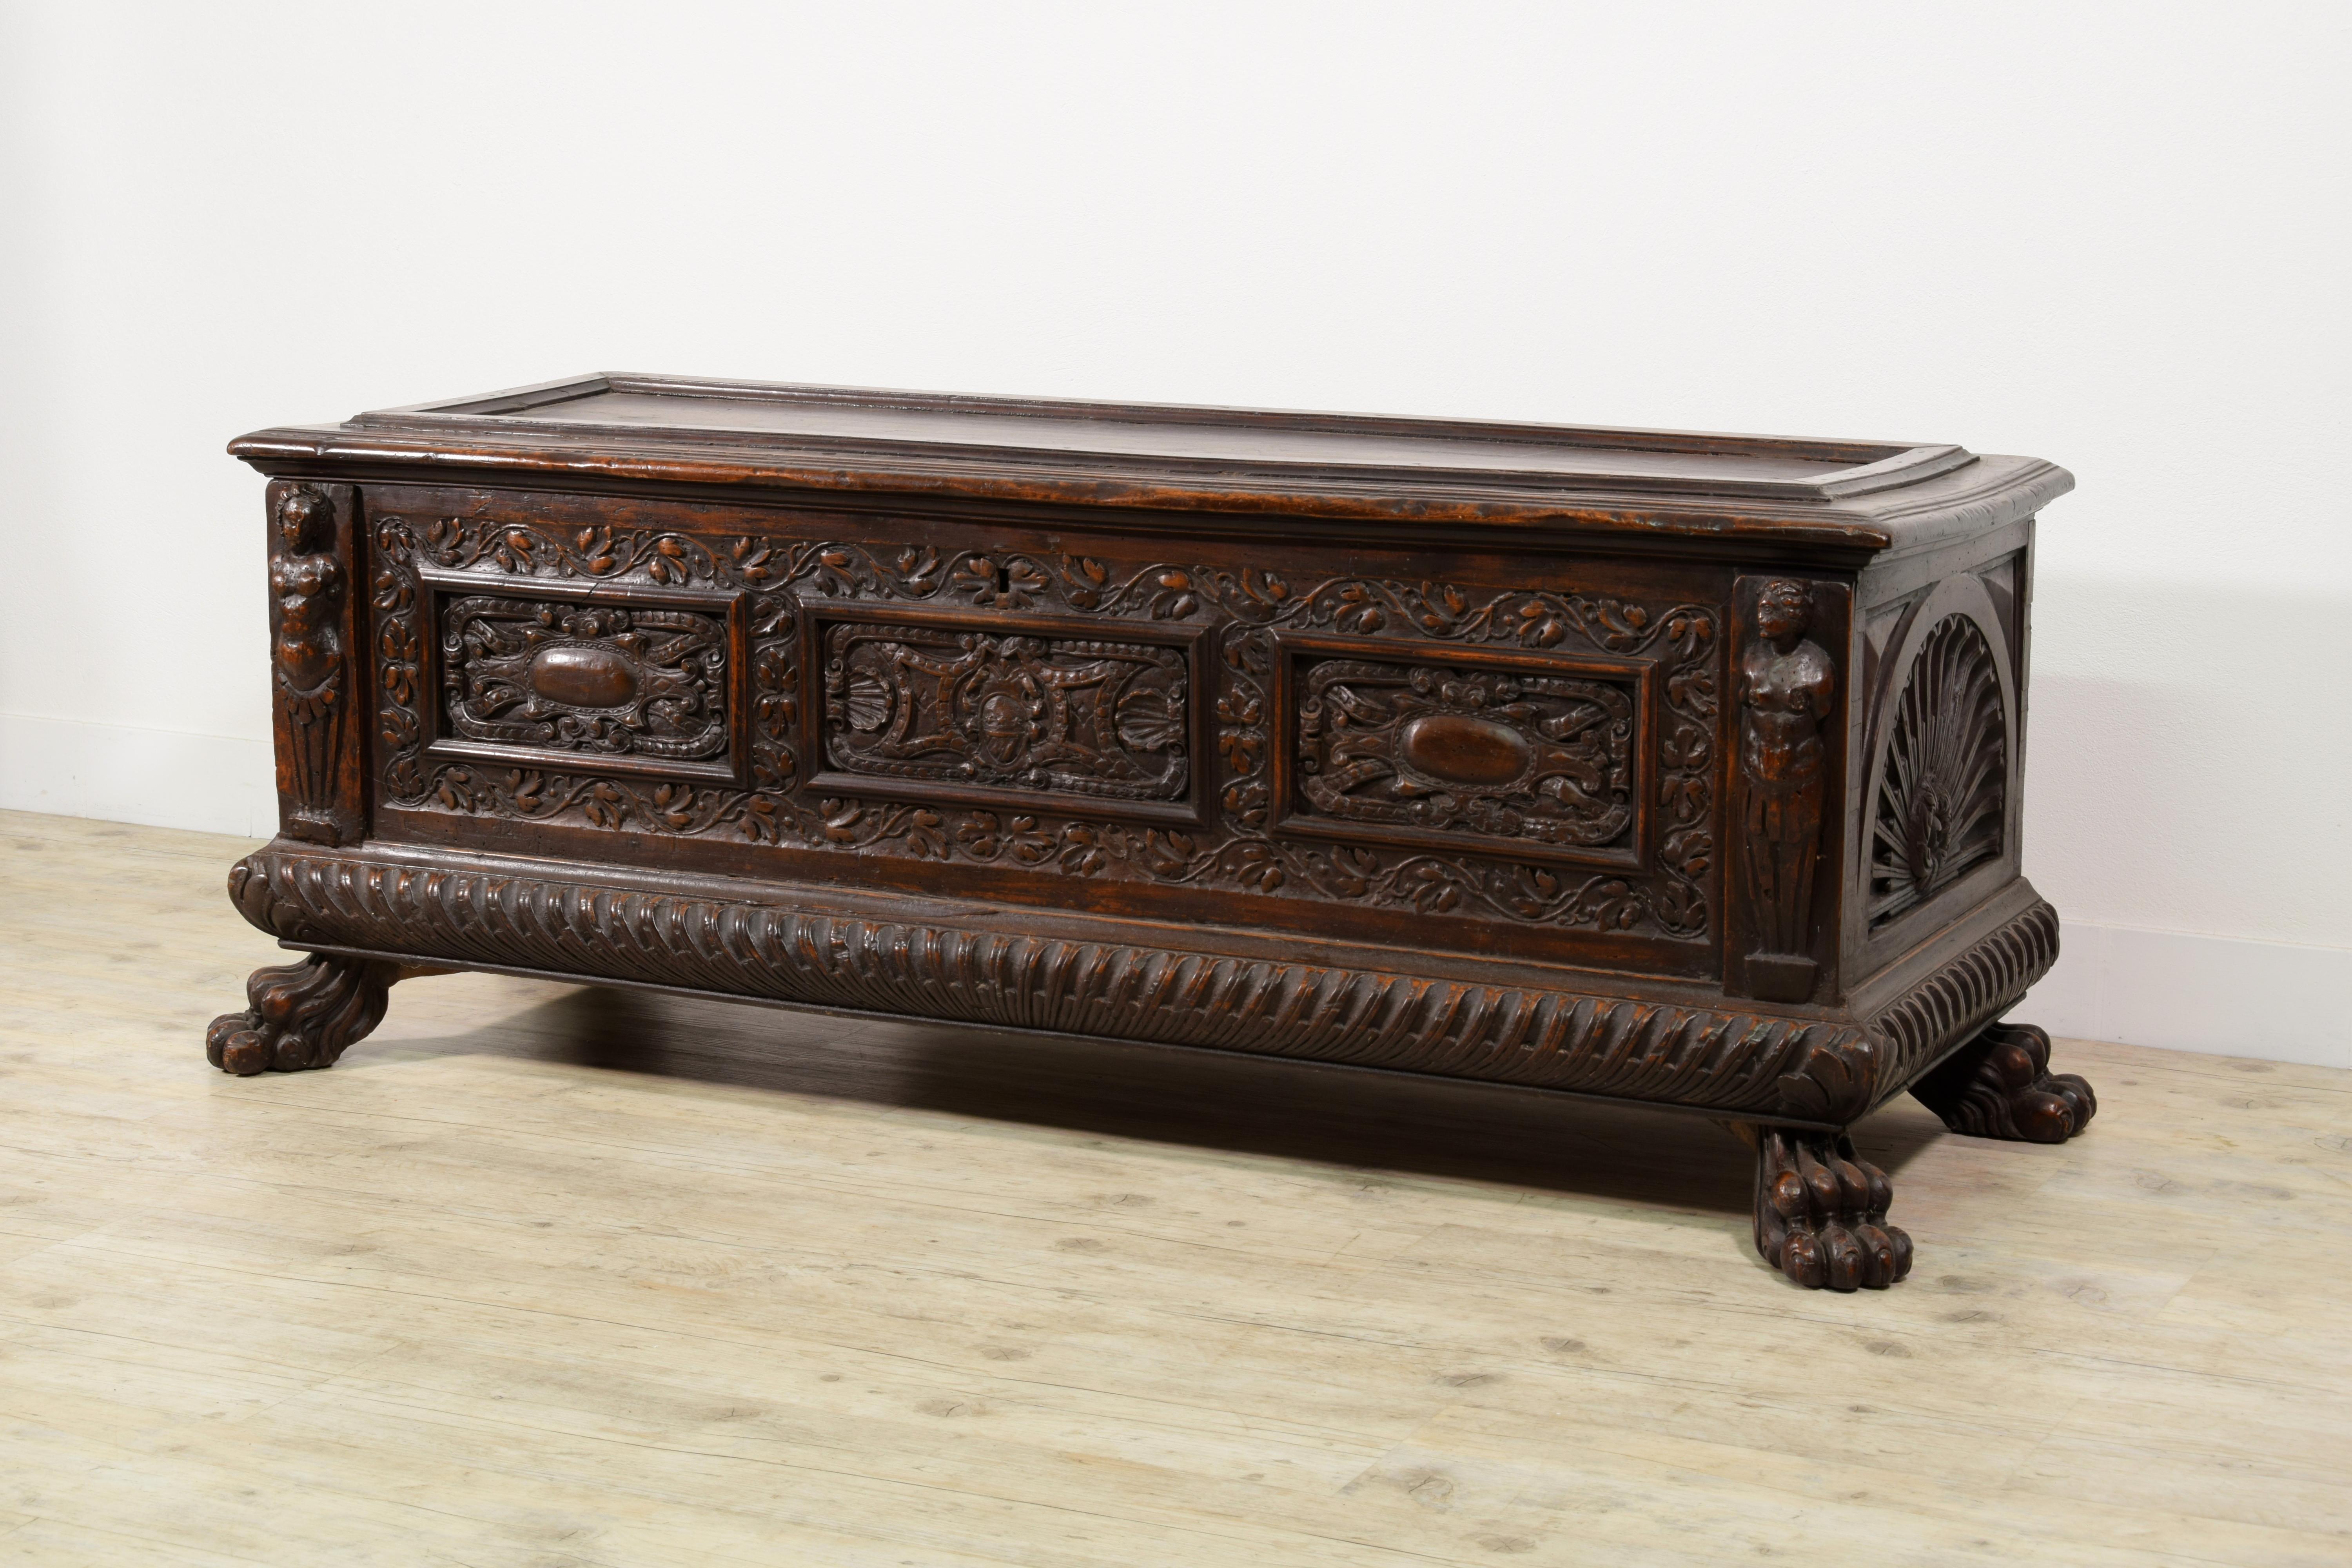 XVI Century, Italian Renaissance wood chest.

This important noble chest of the Tuscan Renaissance was built towards the end of the sixteenth century. In carved and carved walnut wood it consists of a single axis top enriched with a relief frame